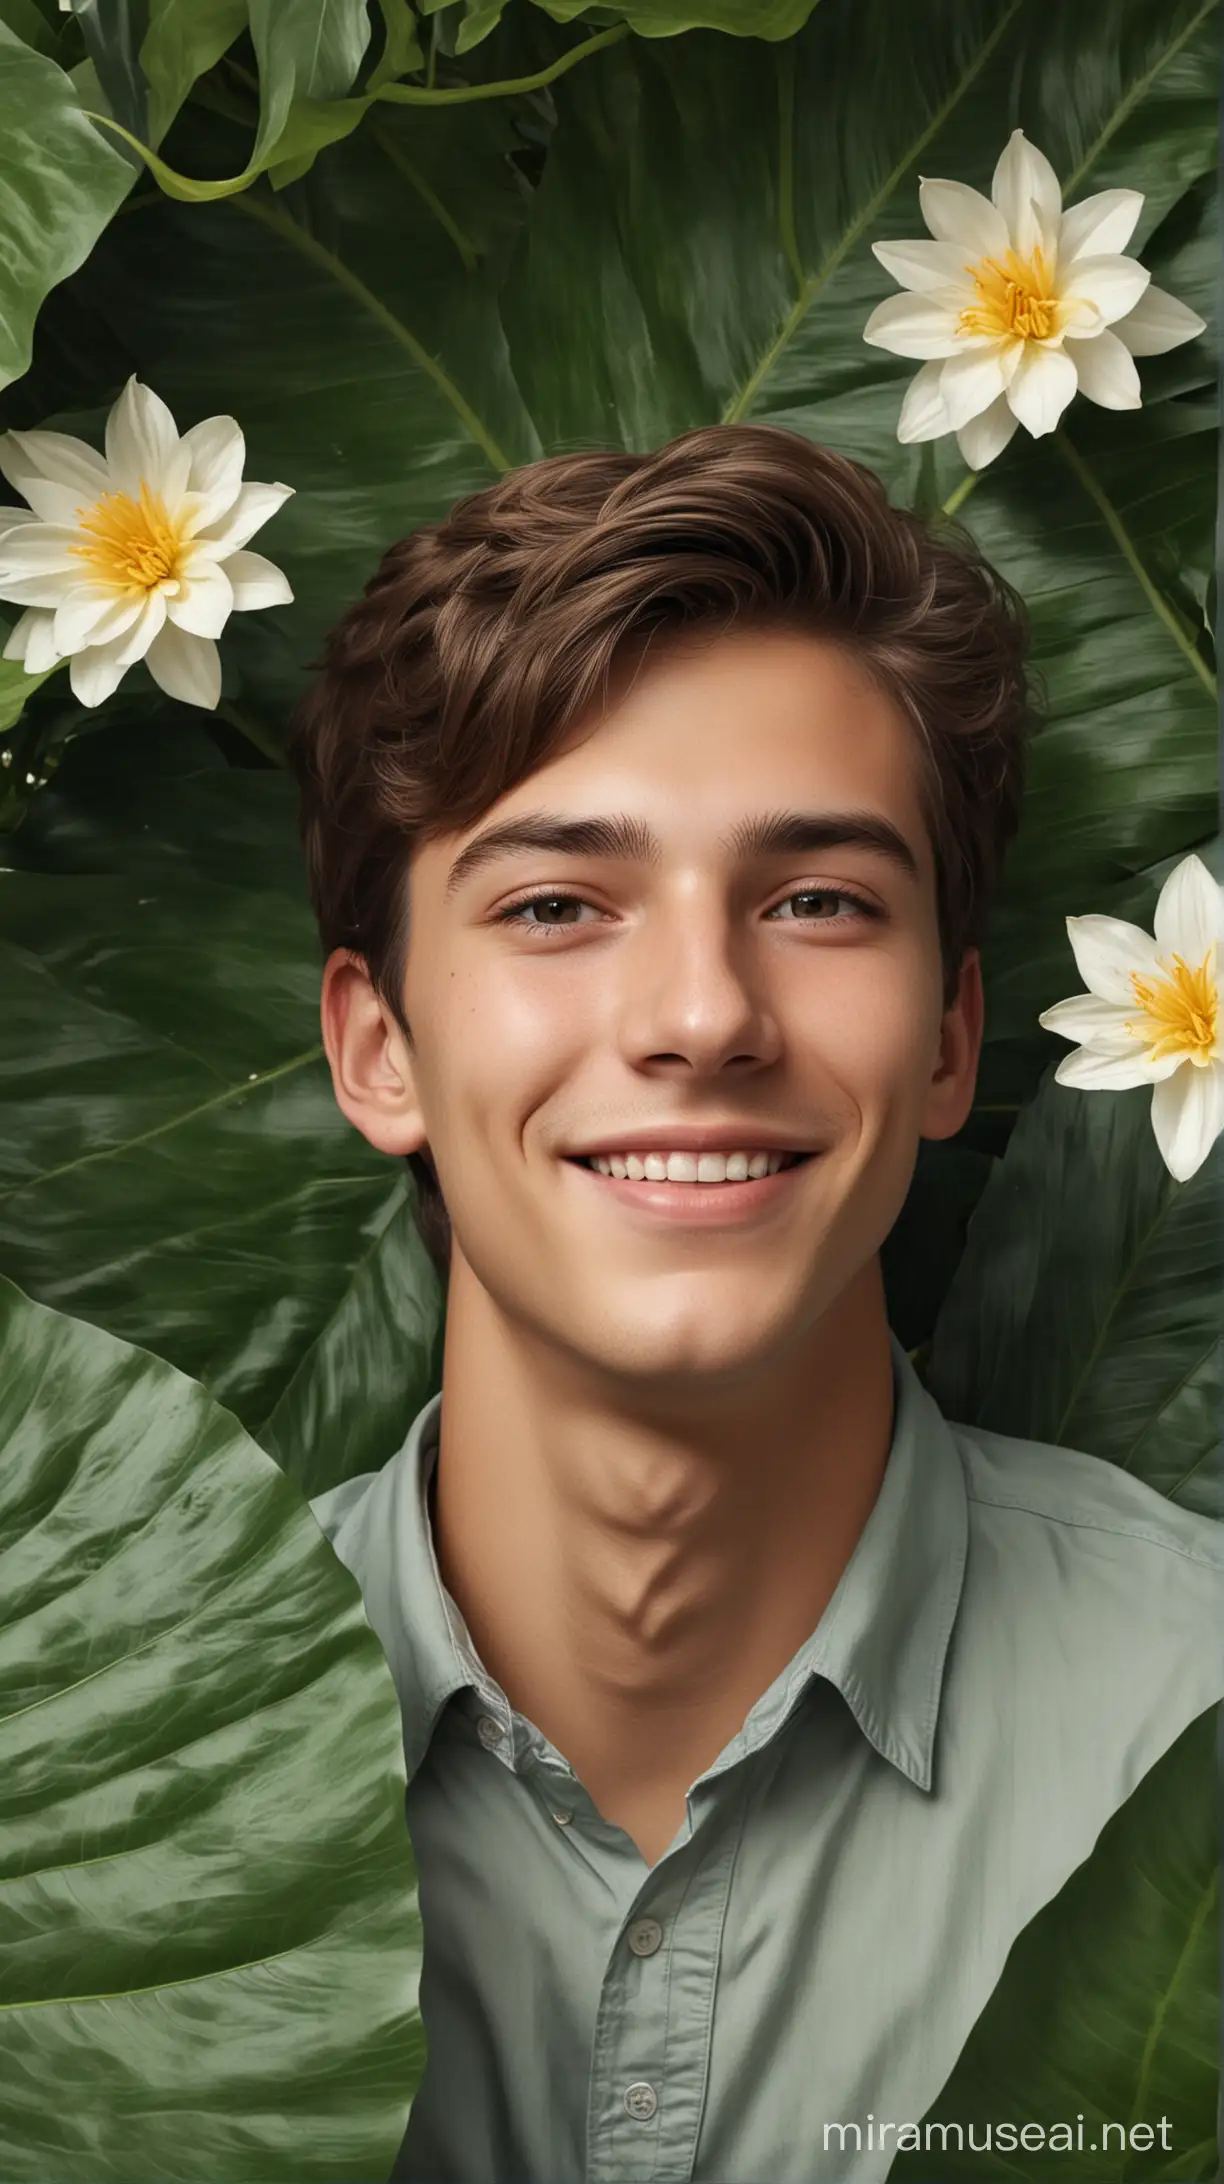 Handsome 18YearOld Man Smiling Shyly on Giant Leaf and Flower Ultra Realistic Art